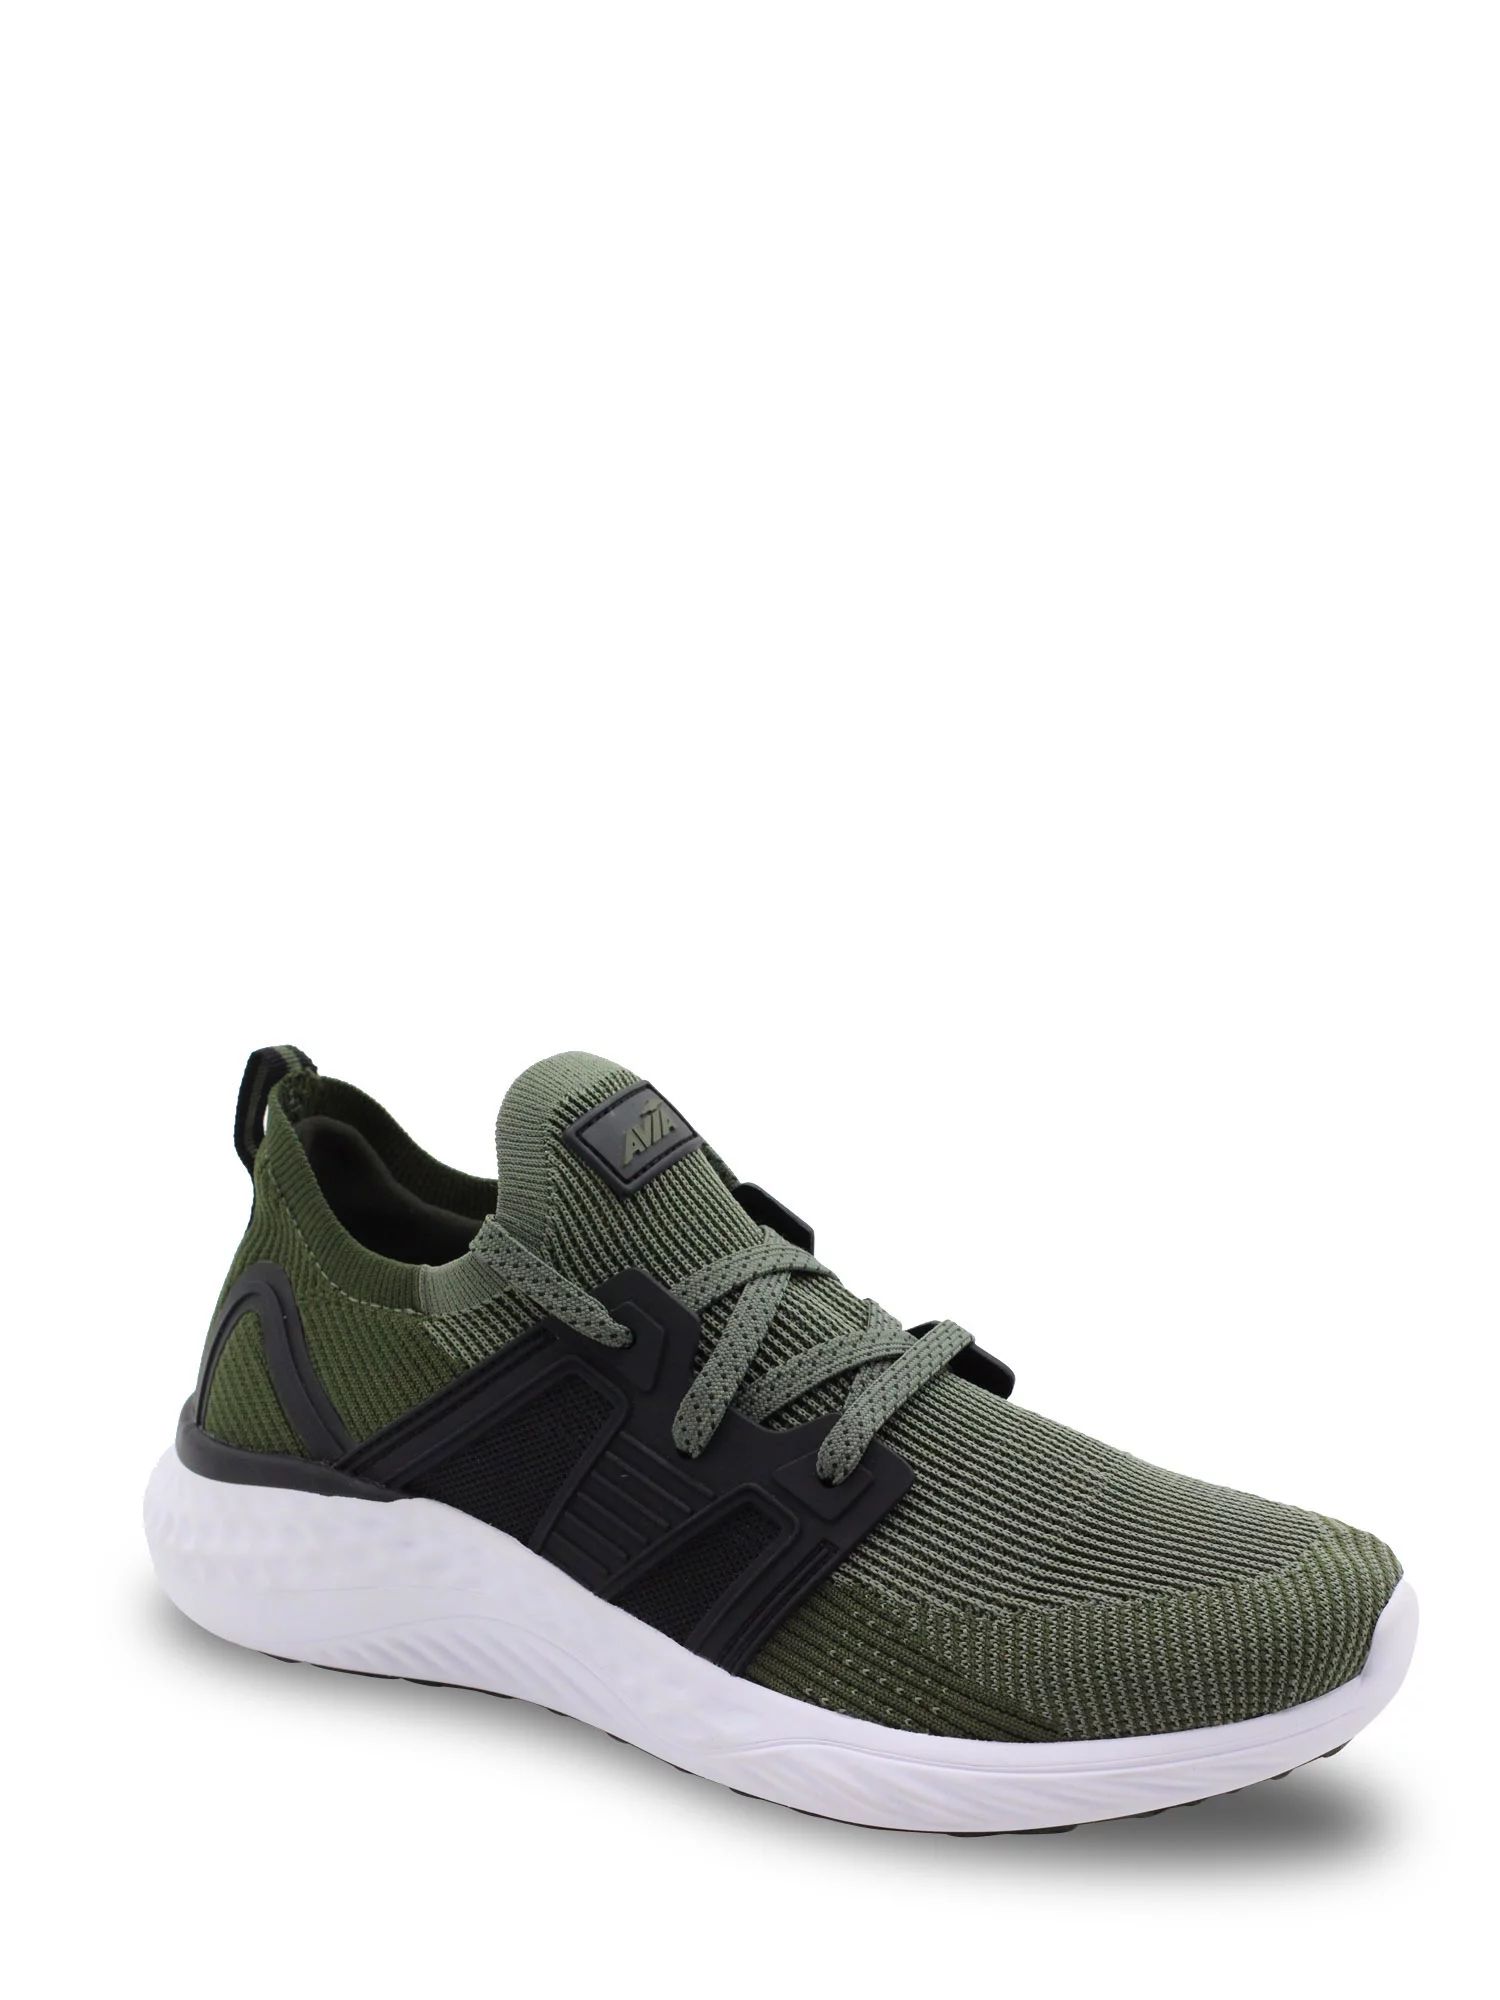 Avia Men's Sequence Lace-up Athletic Sneakers | Walmart (US)